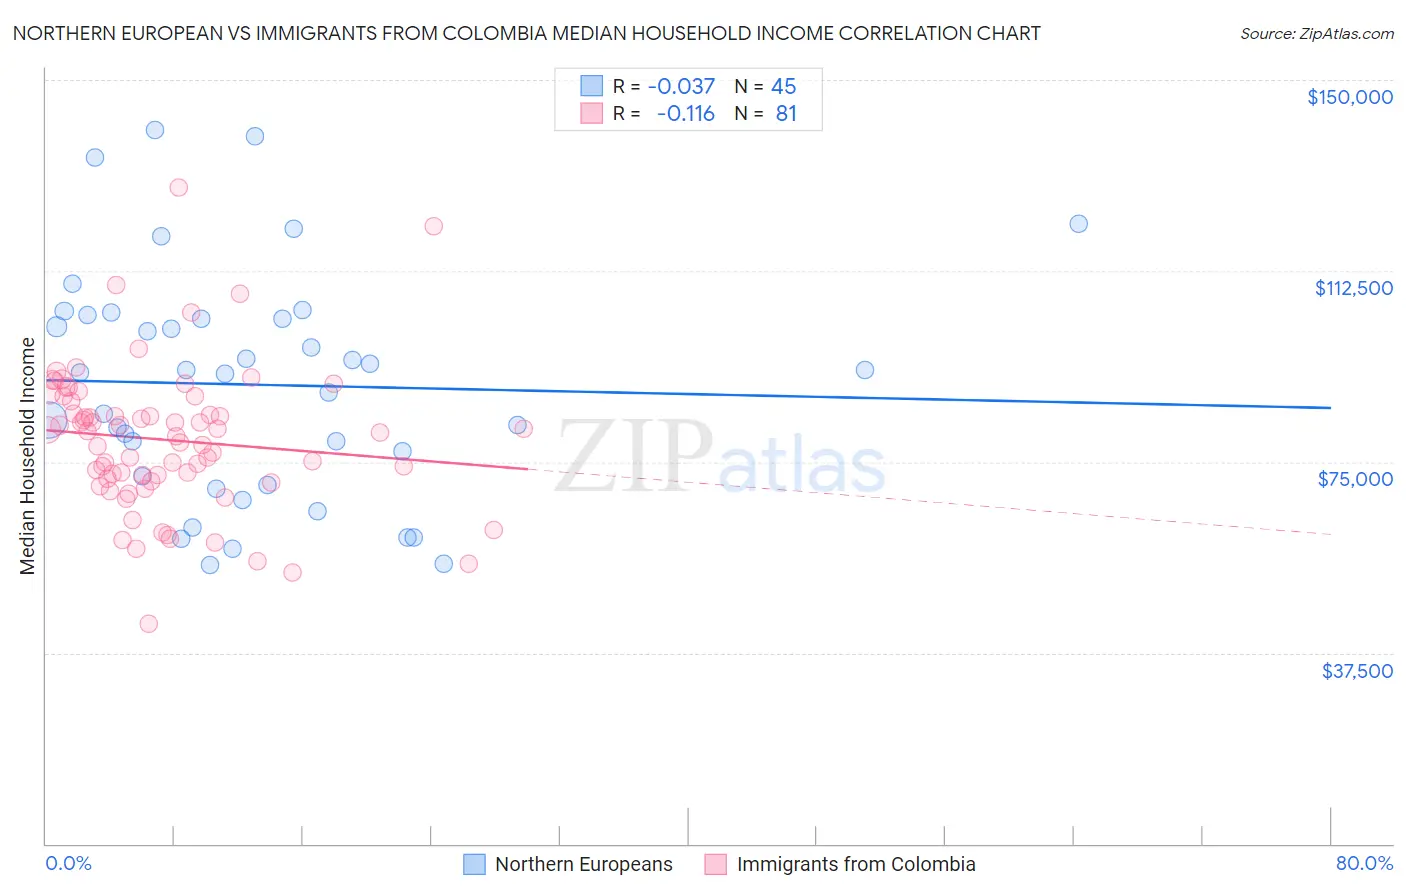 Northern European vs Immigrants from Colombia Median Household Income